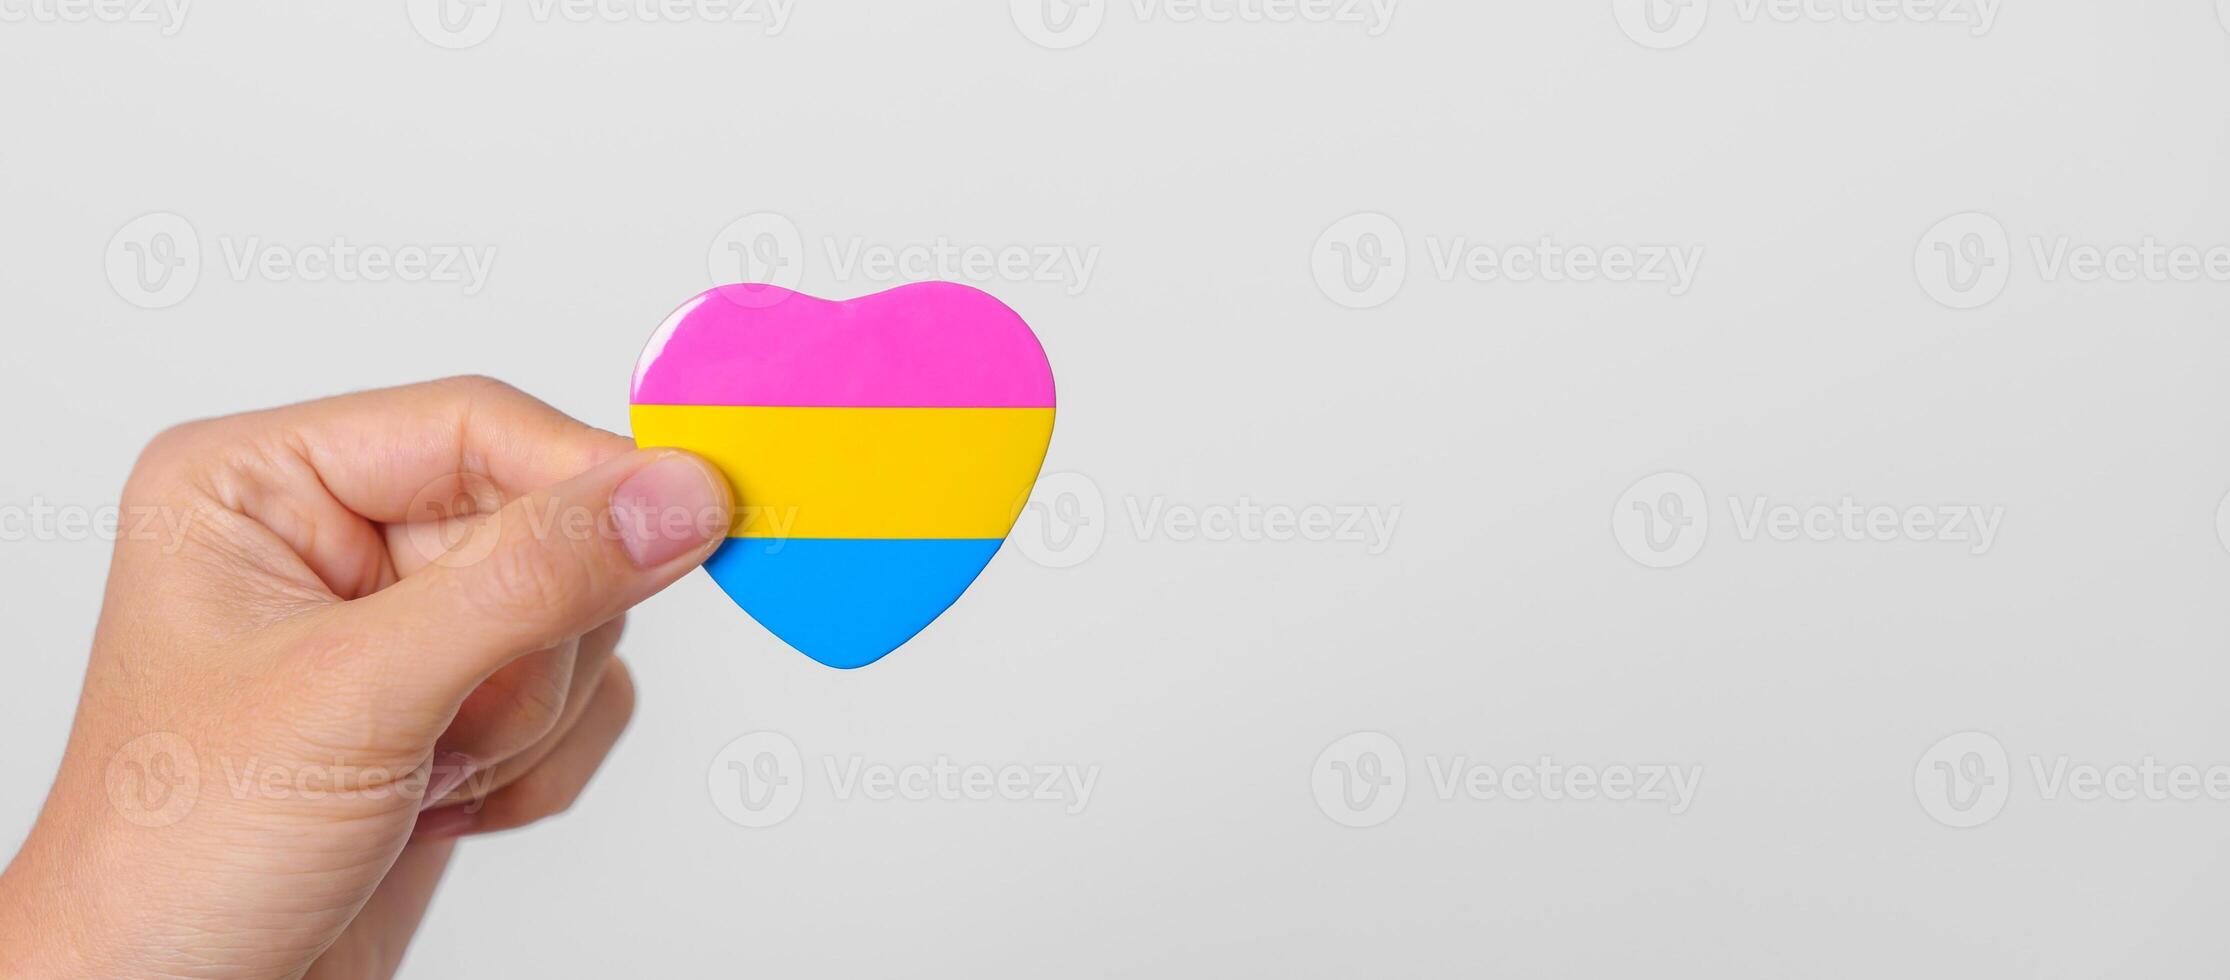 Pansexual Pride Day and LGBT pride month concept. hand holding pink, yellow and blue heart shape for Lesbian, Gay, Bisexual, Transgender, Queer and Pansexual community photo